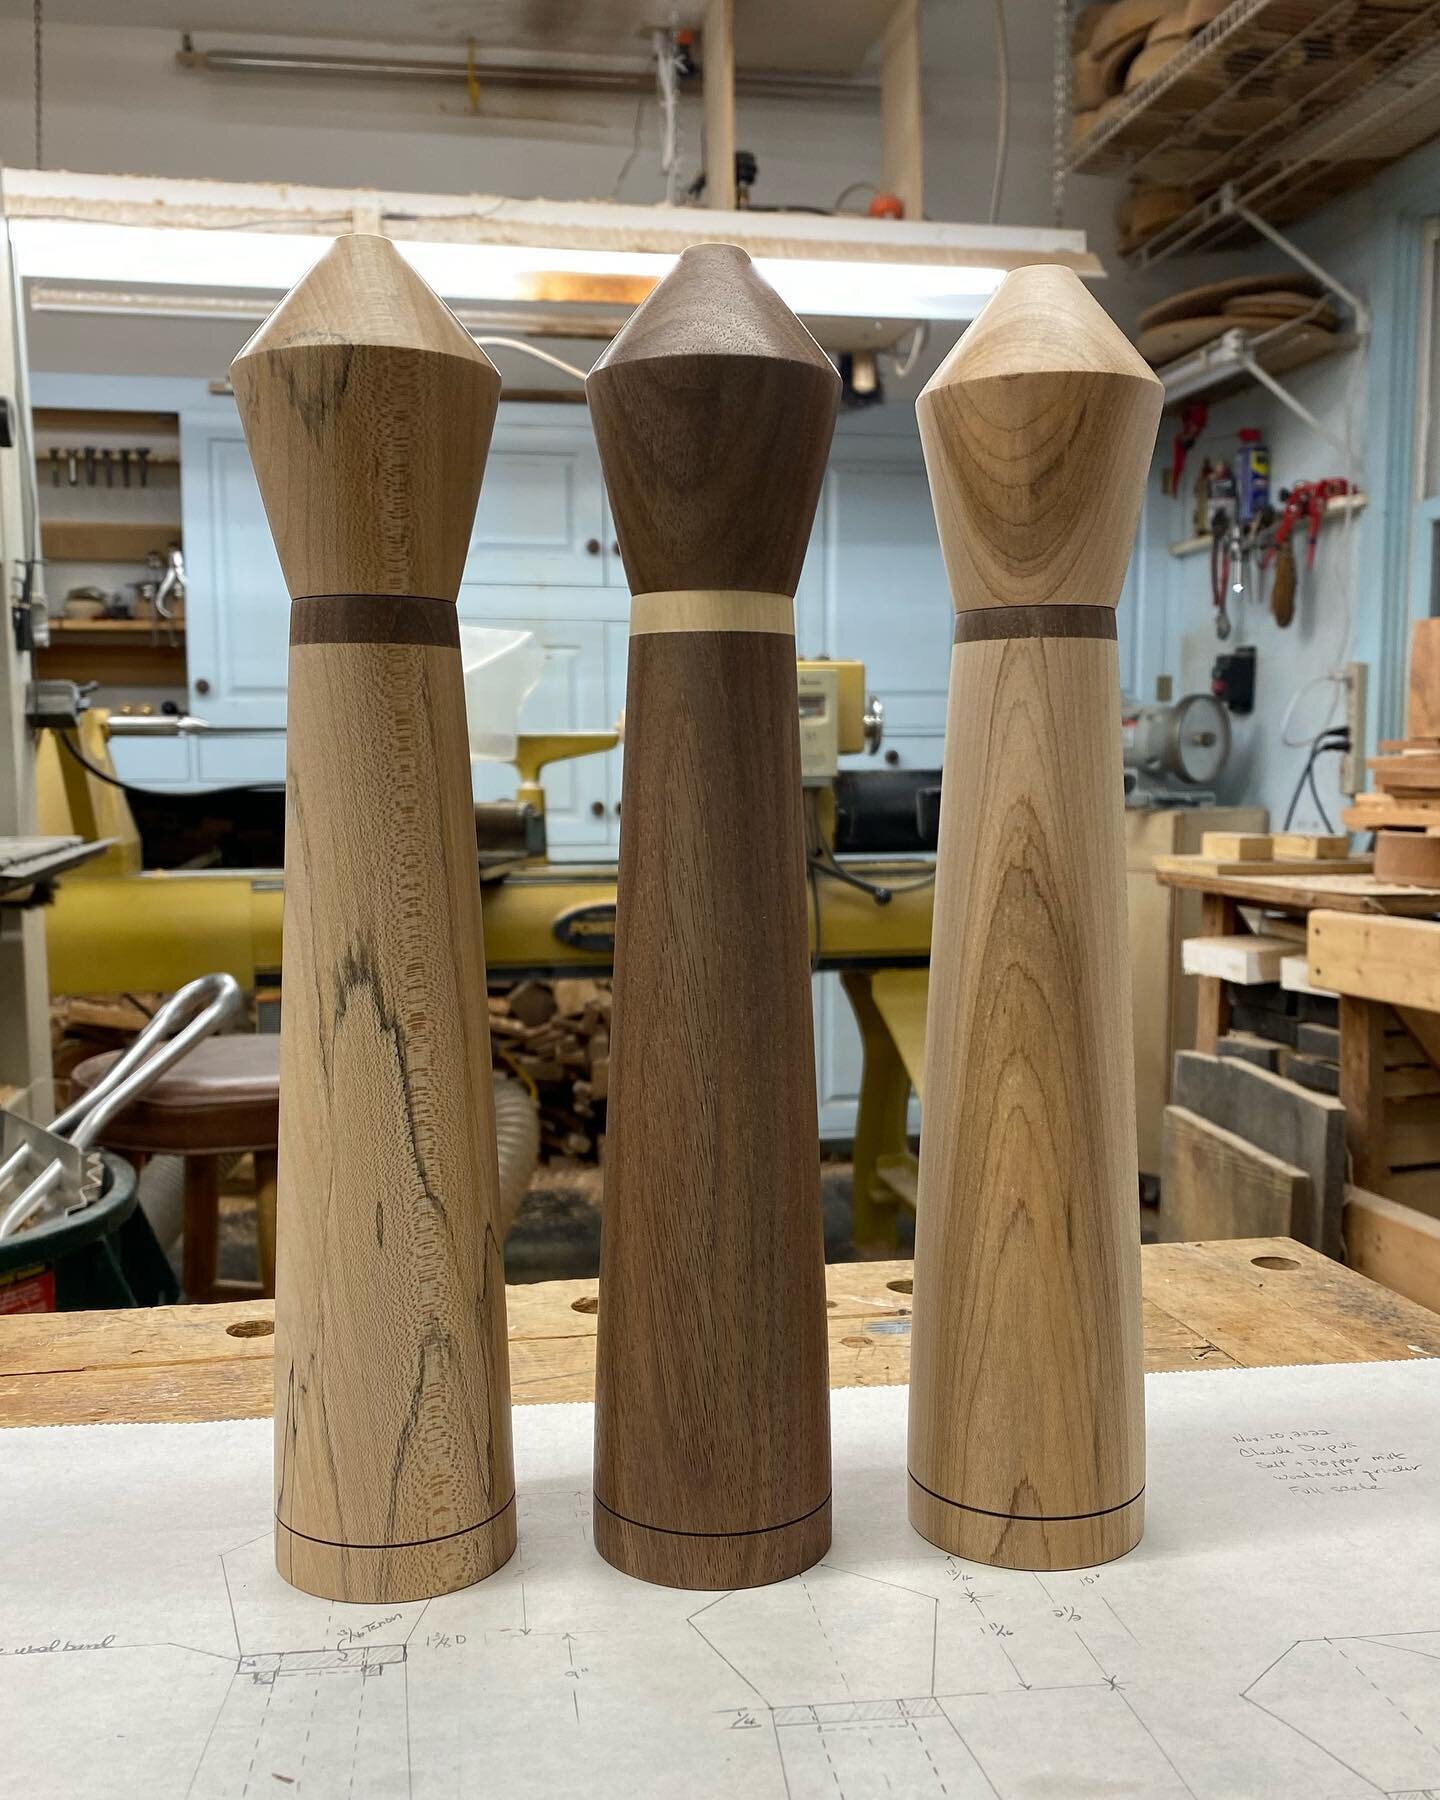 Thought I&rsquo;ed try my hand at a contemporary style mill. #saltandpeppermills #peppermill #handturned #smallbusiness #shoplocal